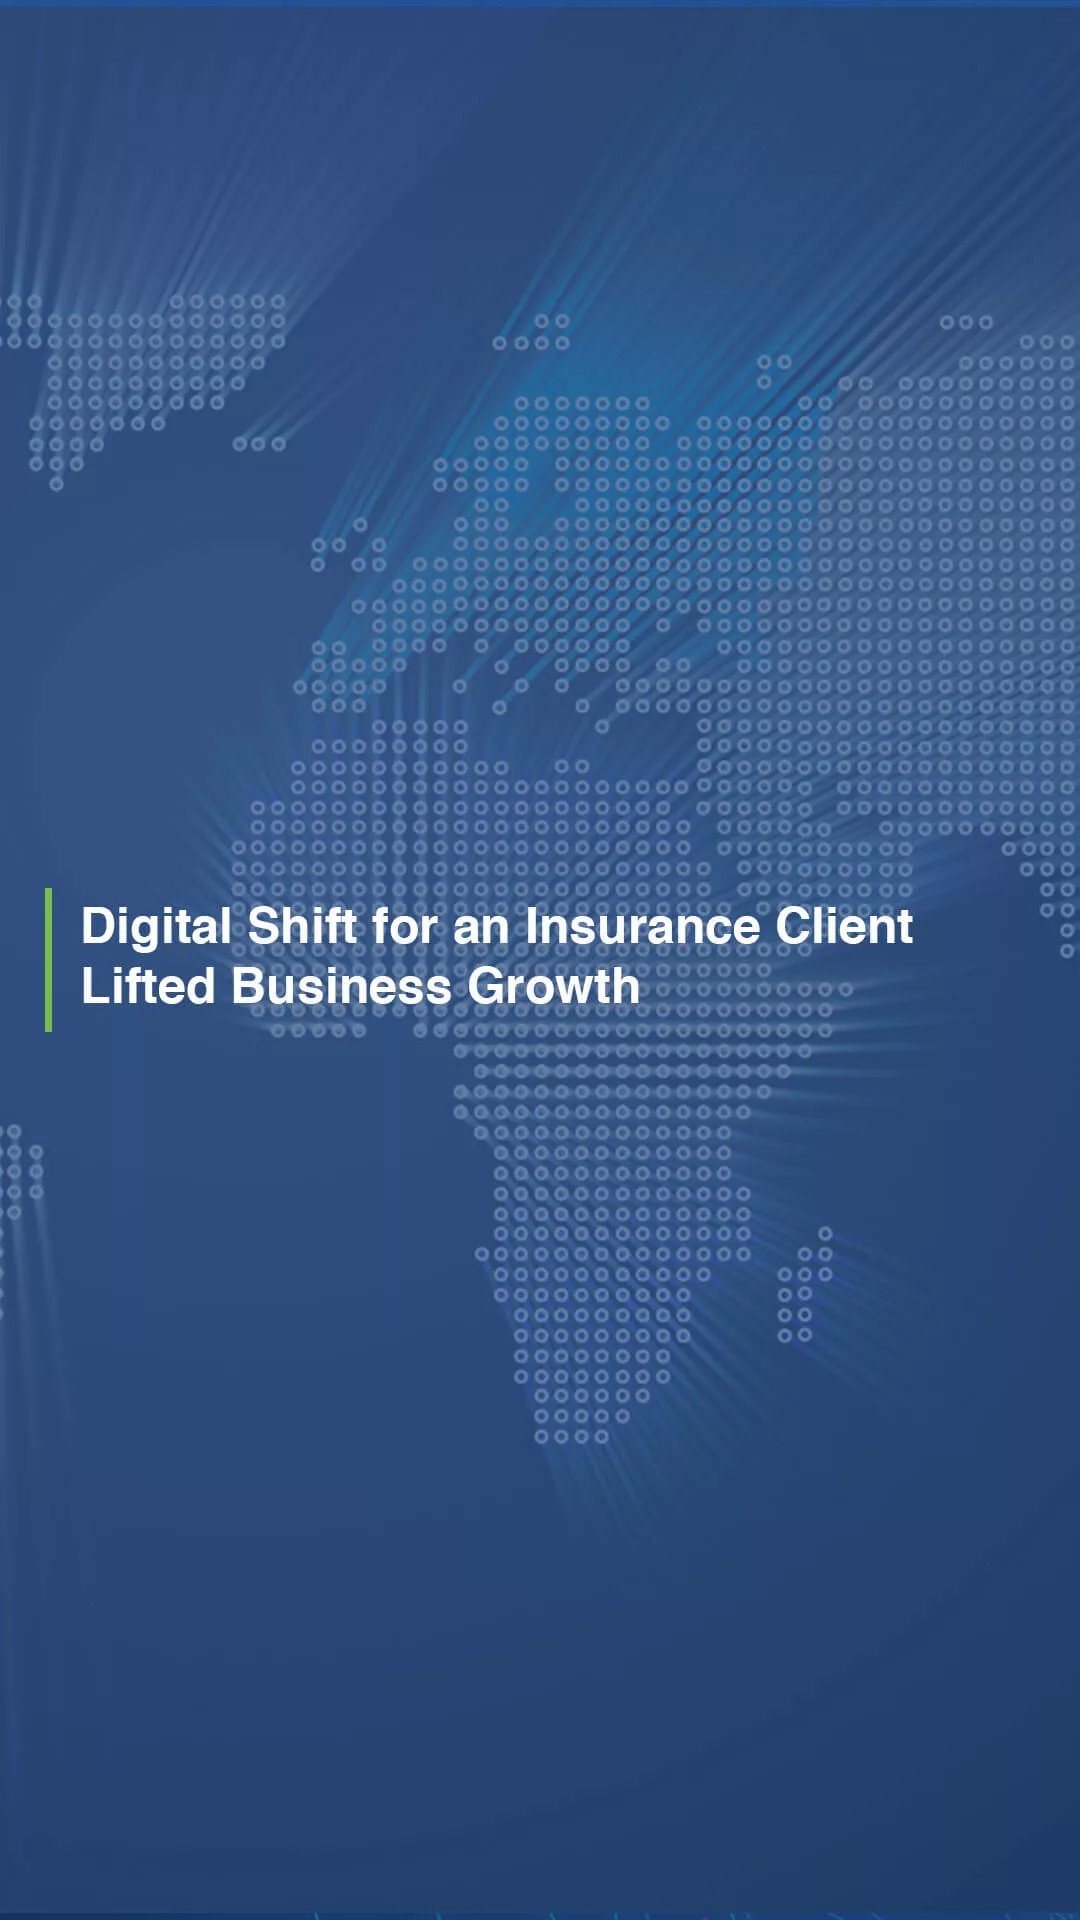 Digital Transformation for an Insurance Client Lifted Business Growth